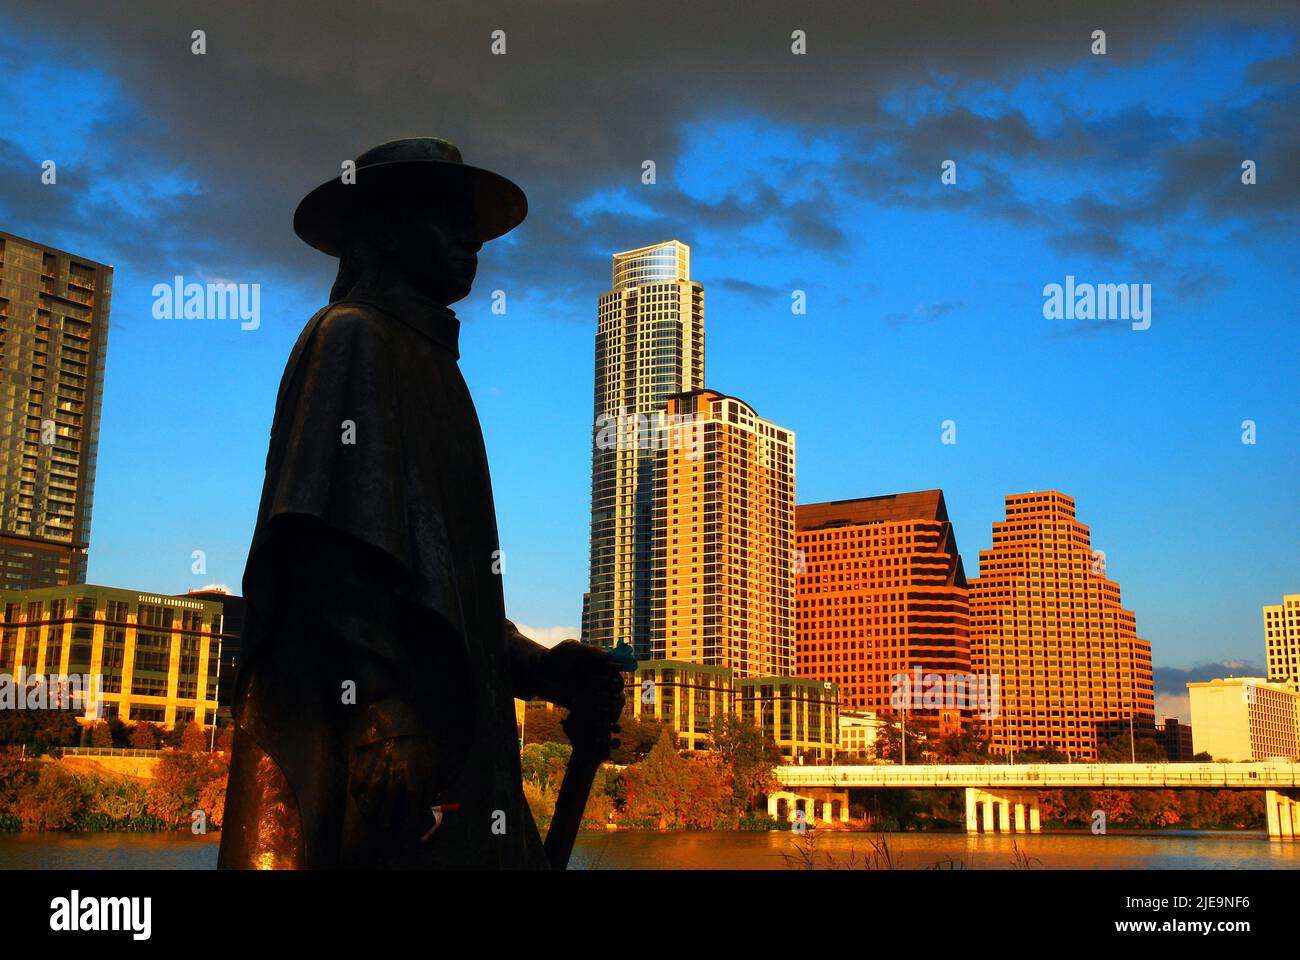 A sculpture statue of rock and roll musician and guitarist Stevie Ray Vaughn stands in silhouette against the skyline of Austin Texas Stock Photo